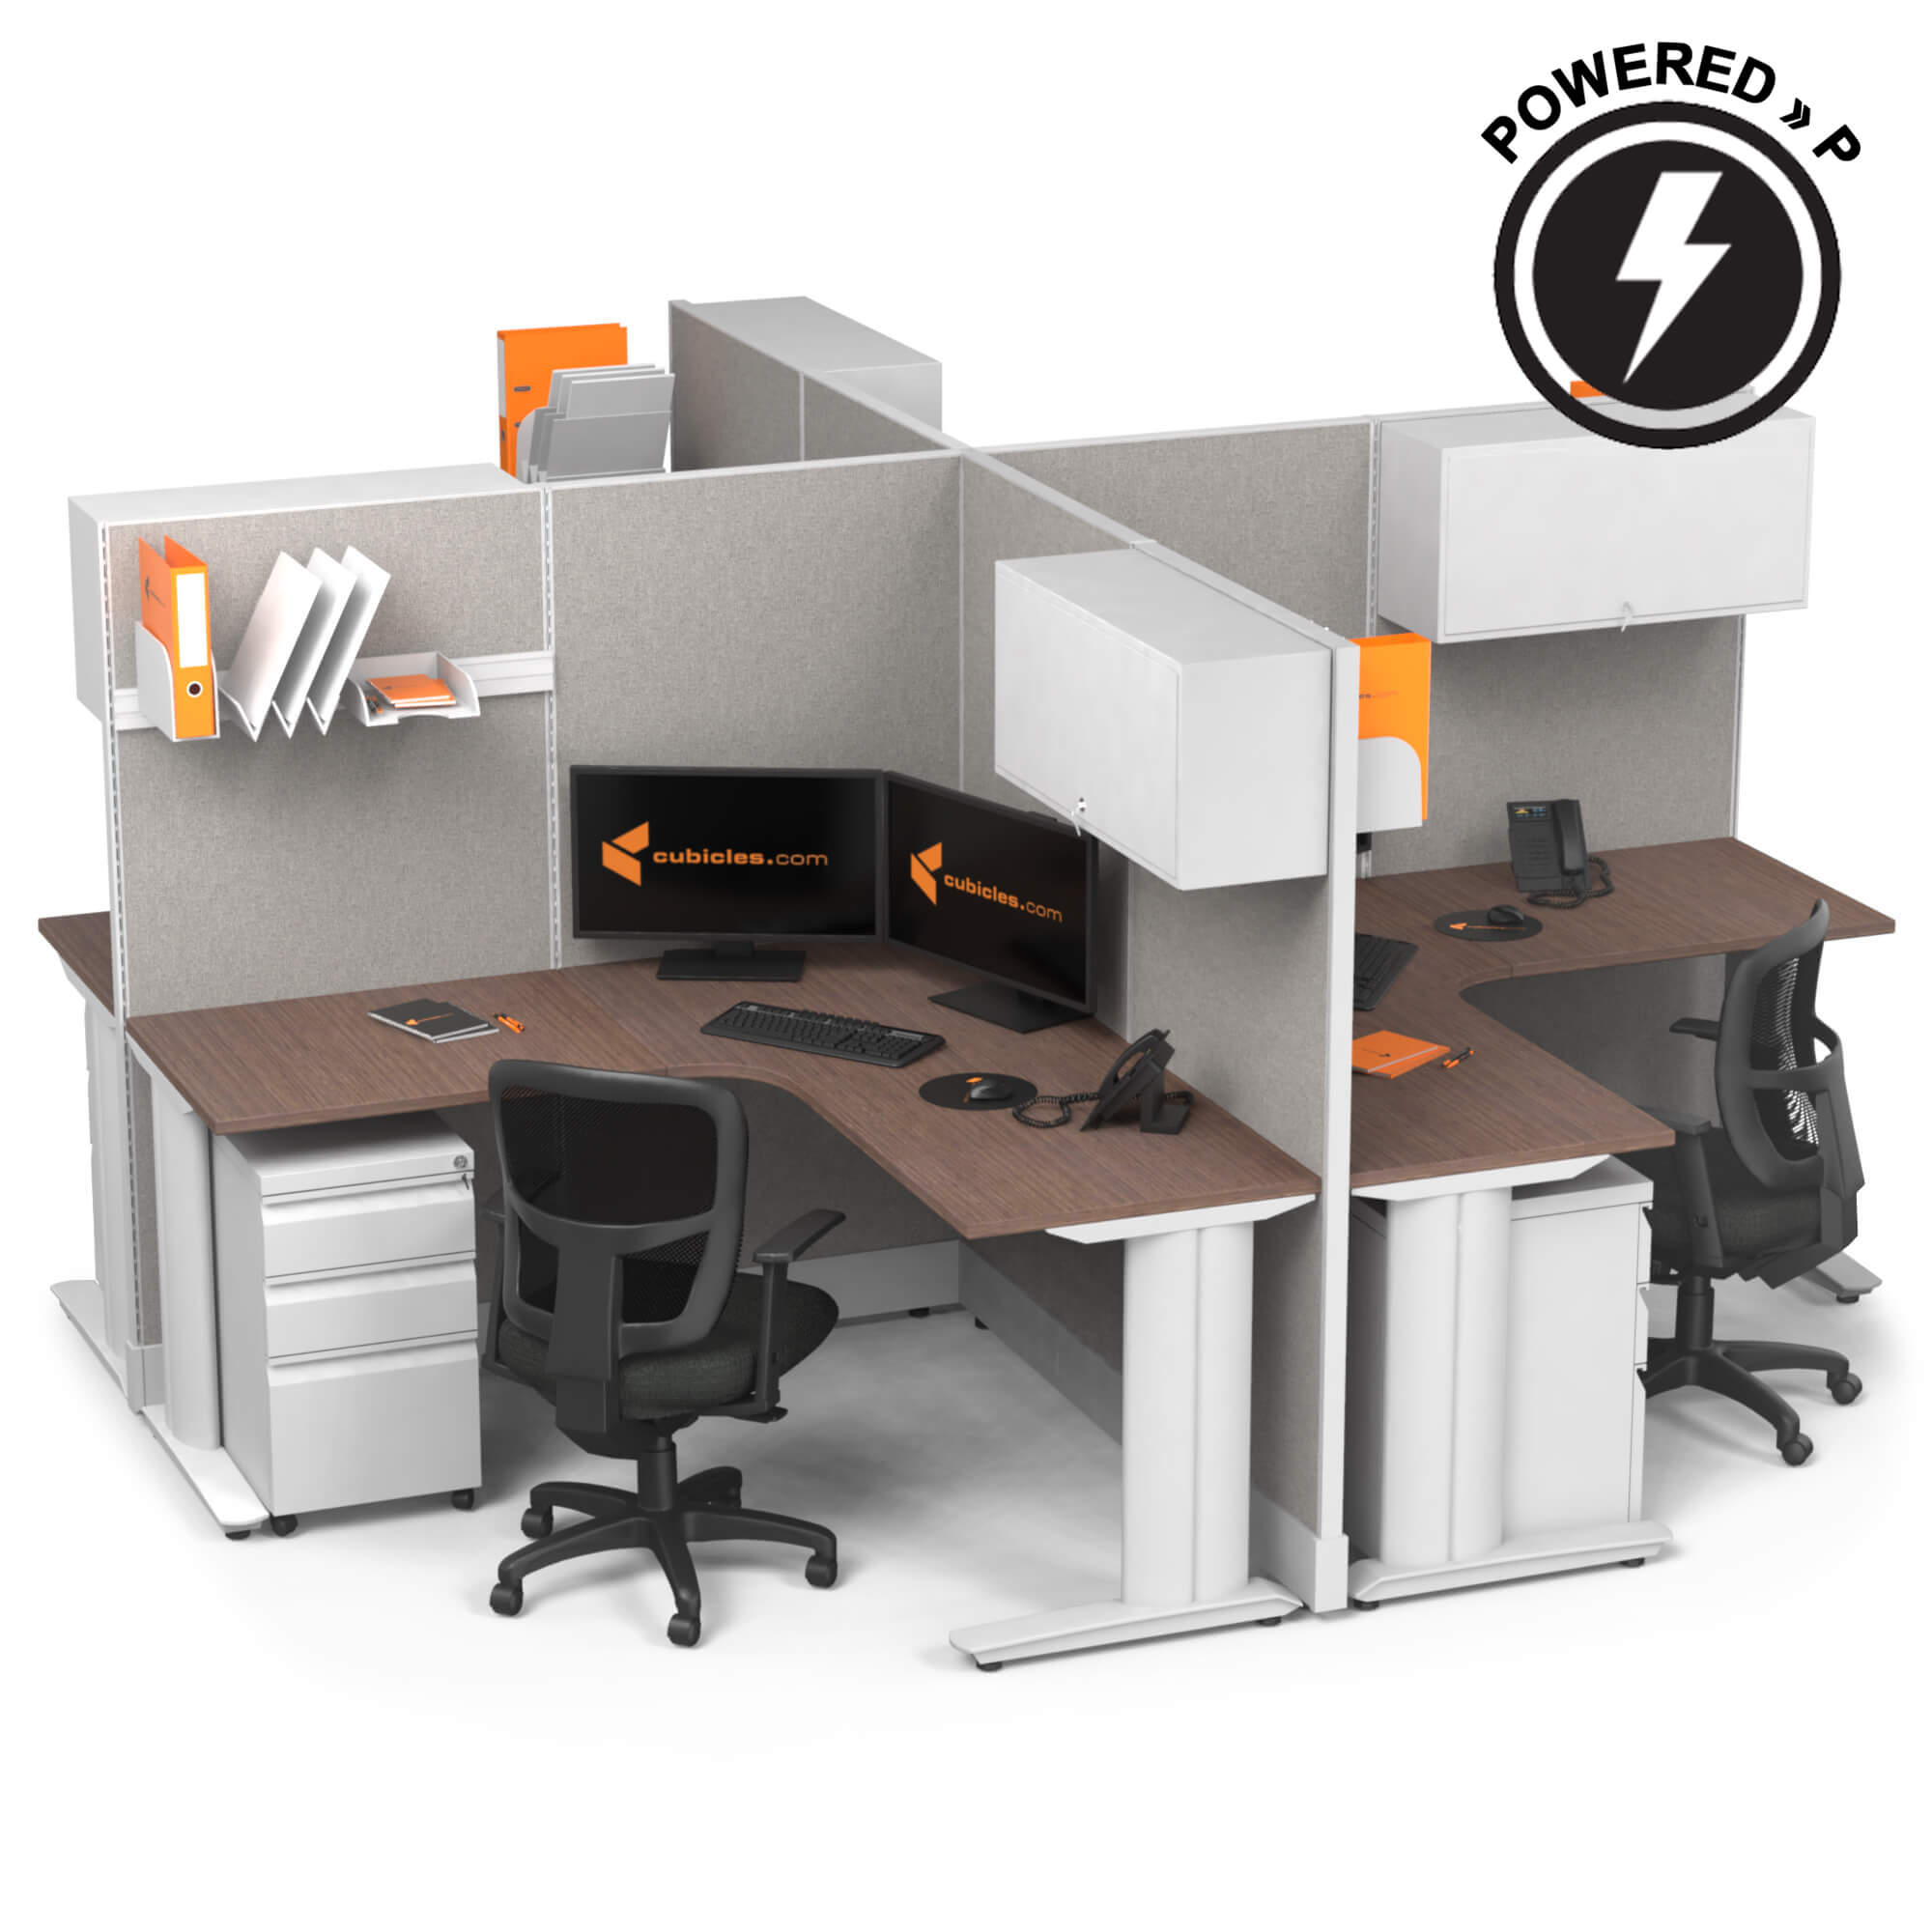 cubicle-desk-x-cluster-workstation-powered-with-storage-sign.jpg